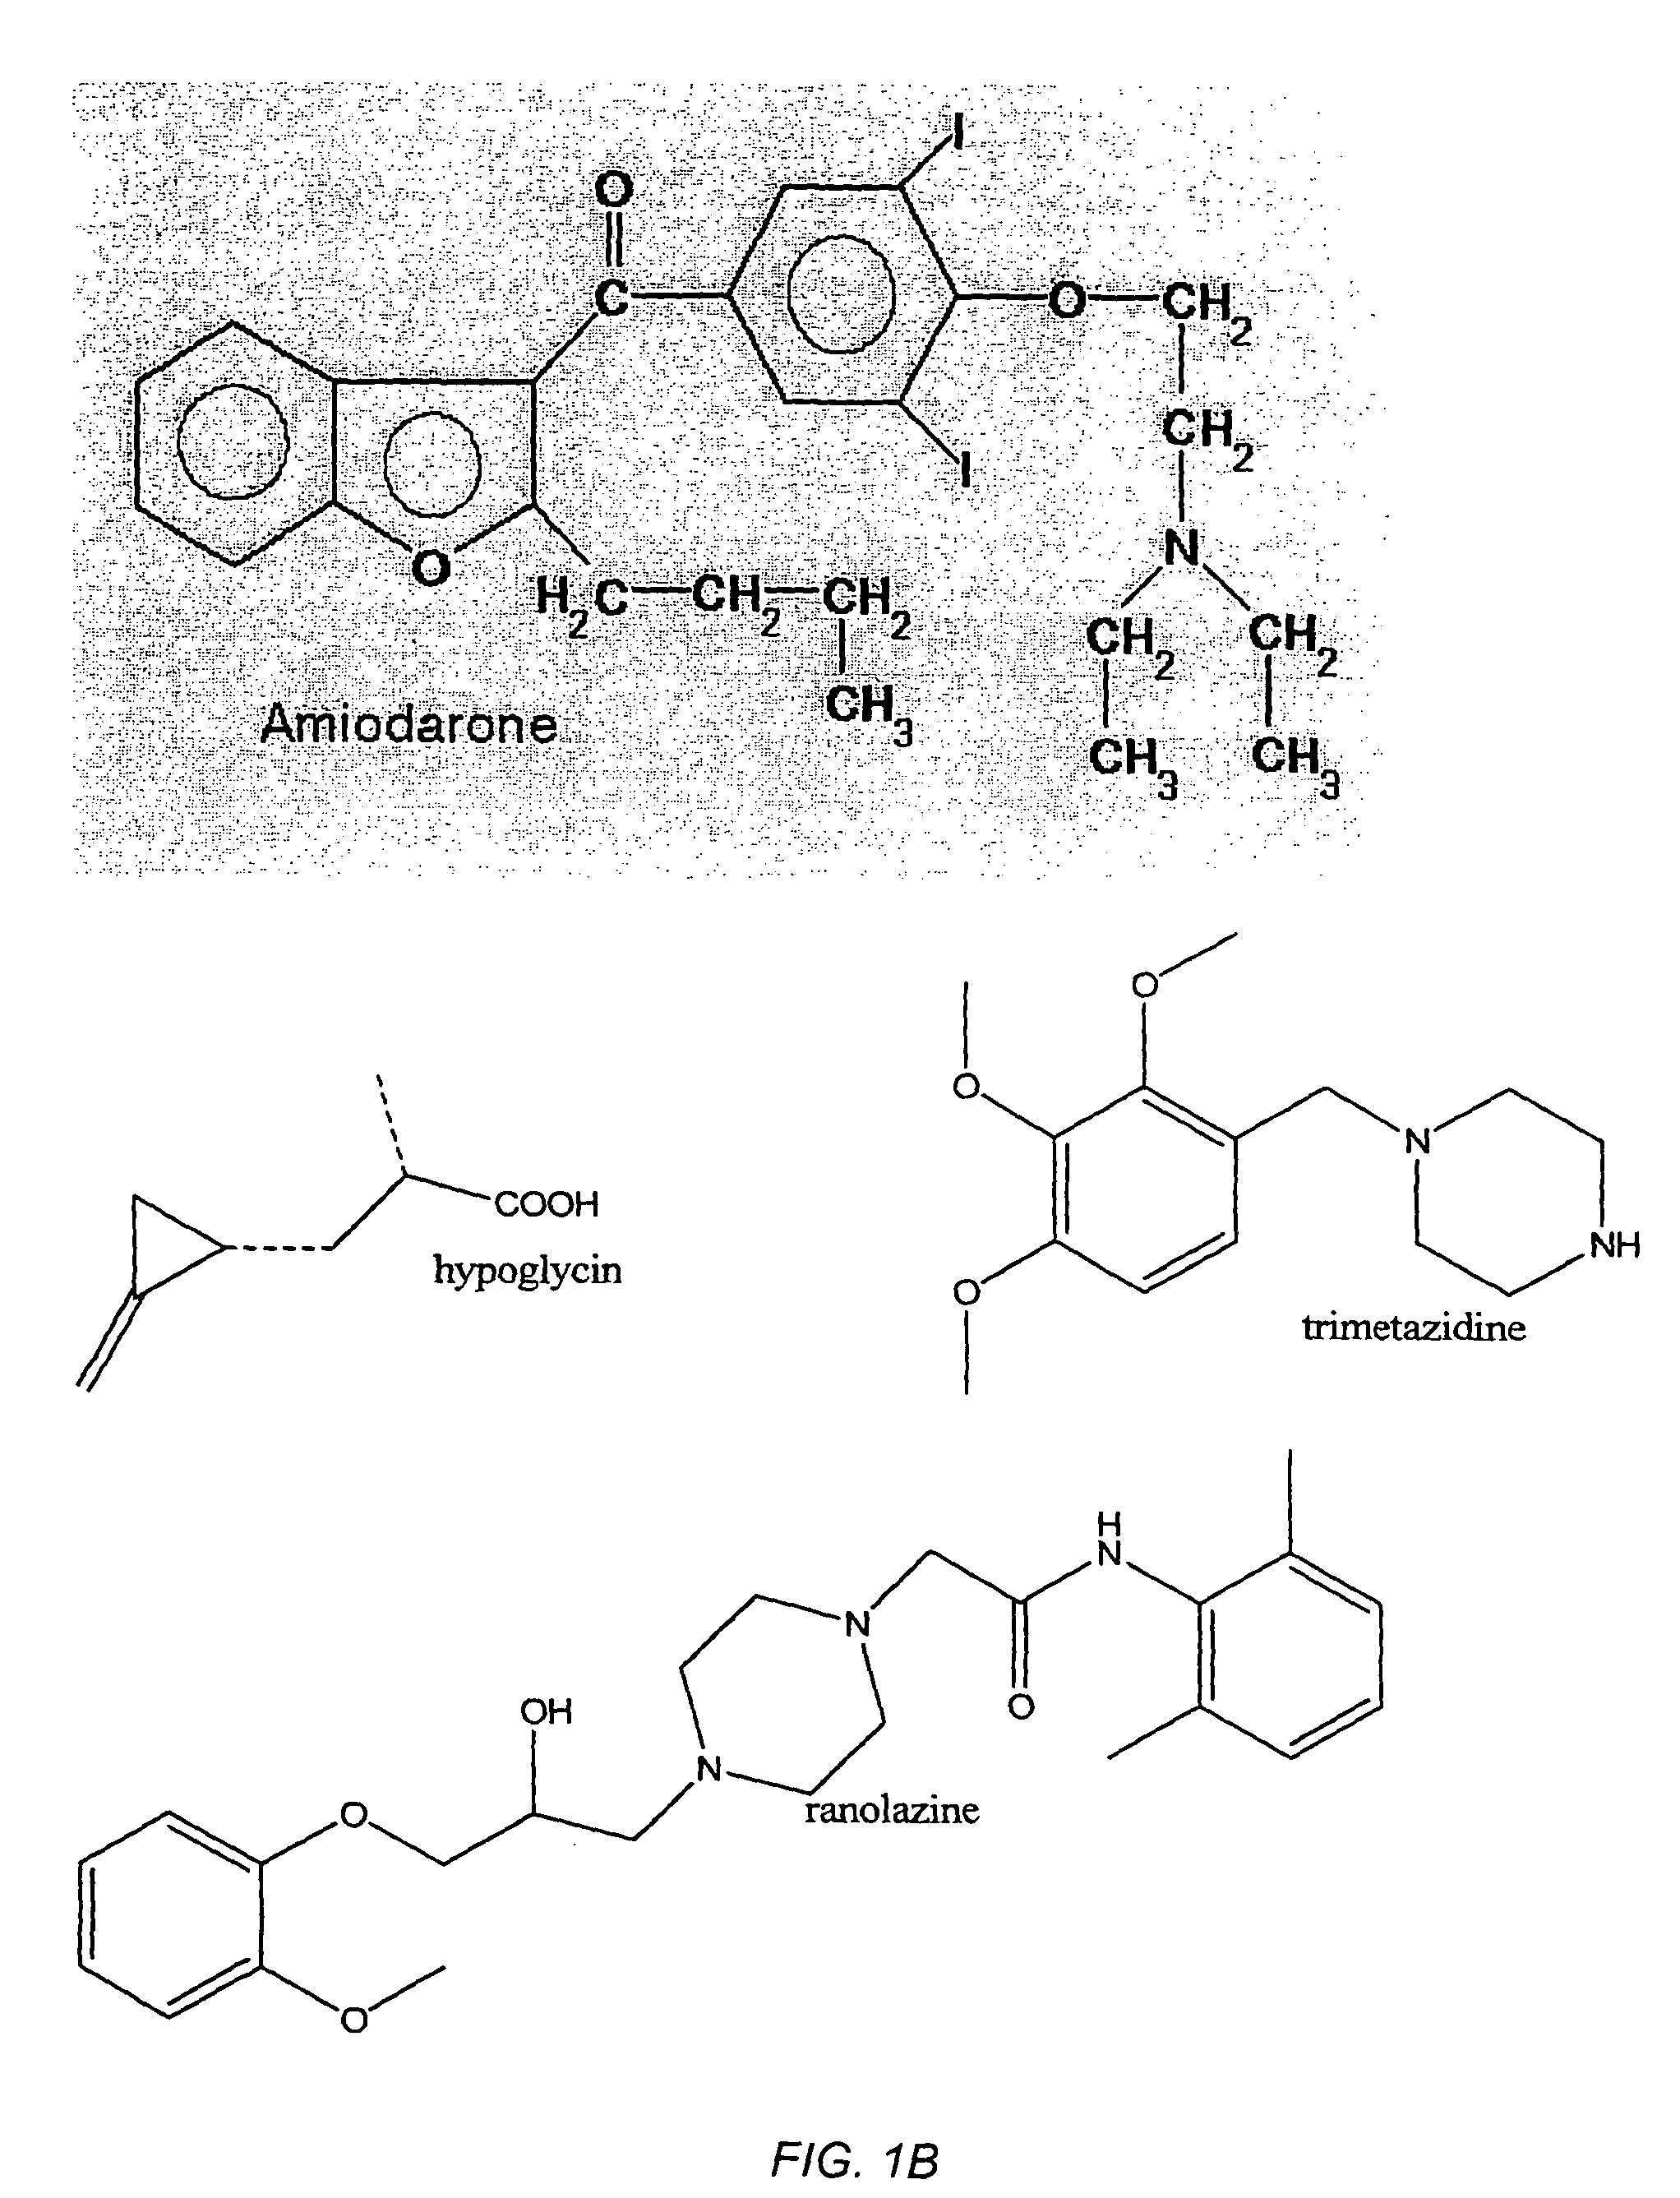 Systems and methods for treating human inflammatory and proliferative diseases and wounds, with fatty acid metabolism inhibitors and/or glycolytic inhibitors